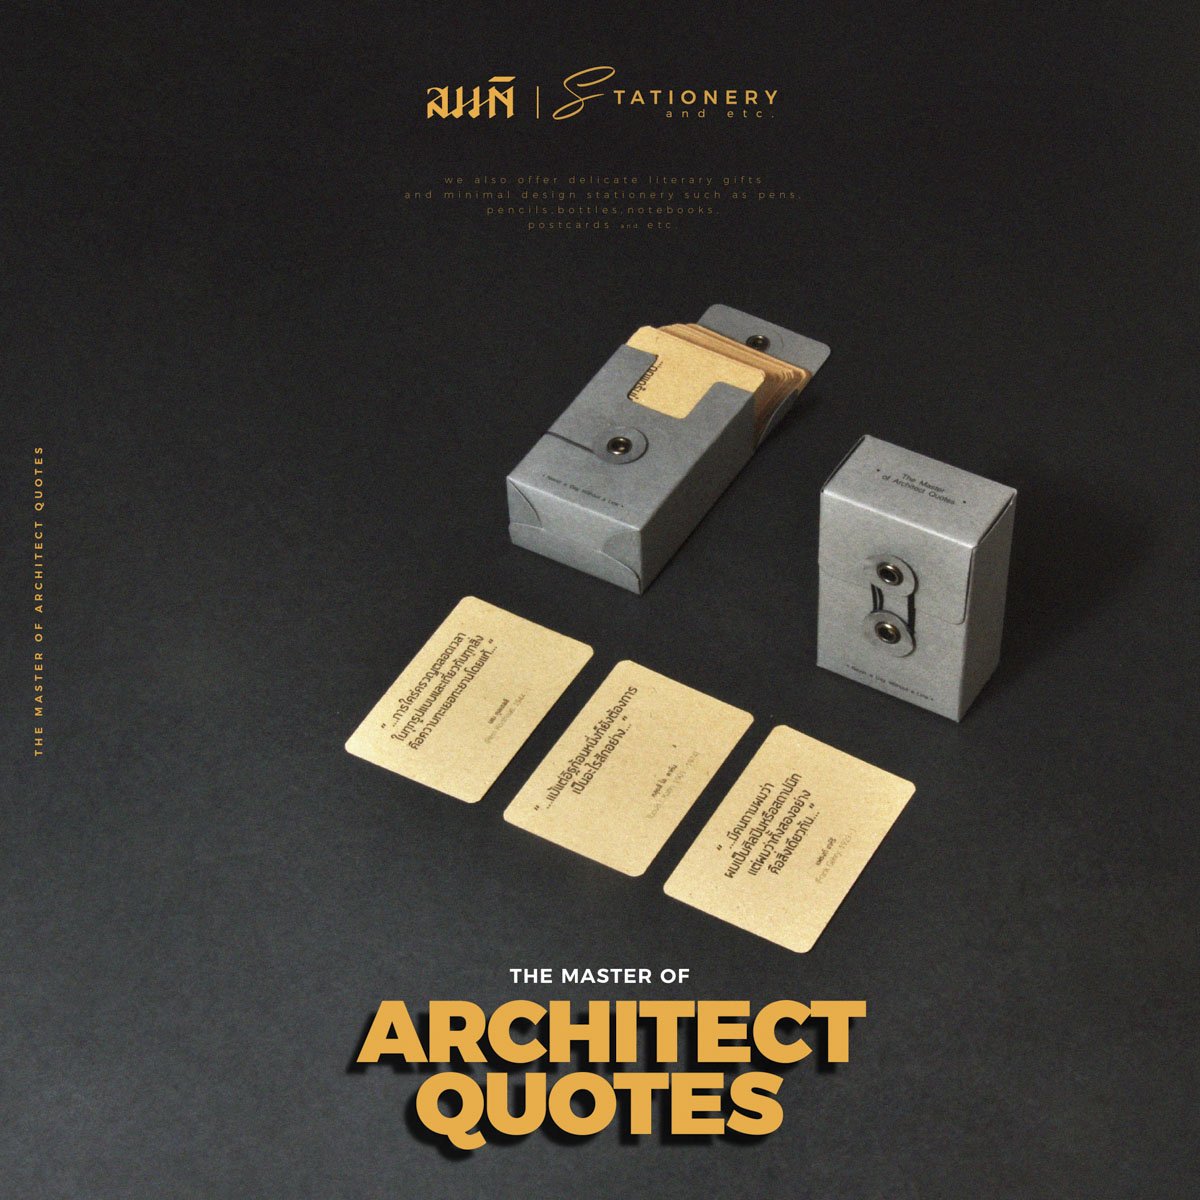 The Master of Architect Quotes